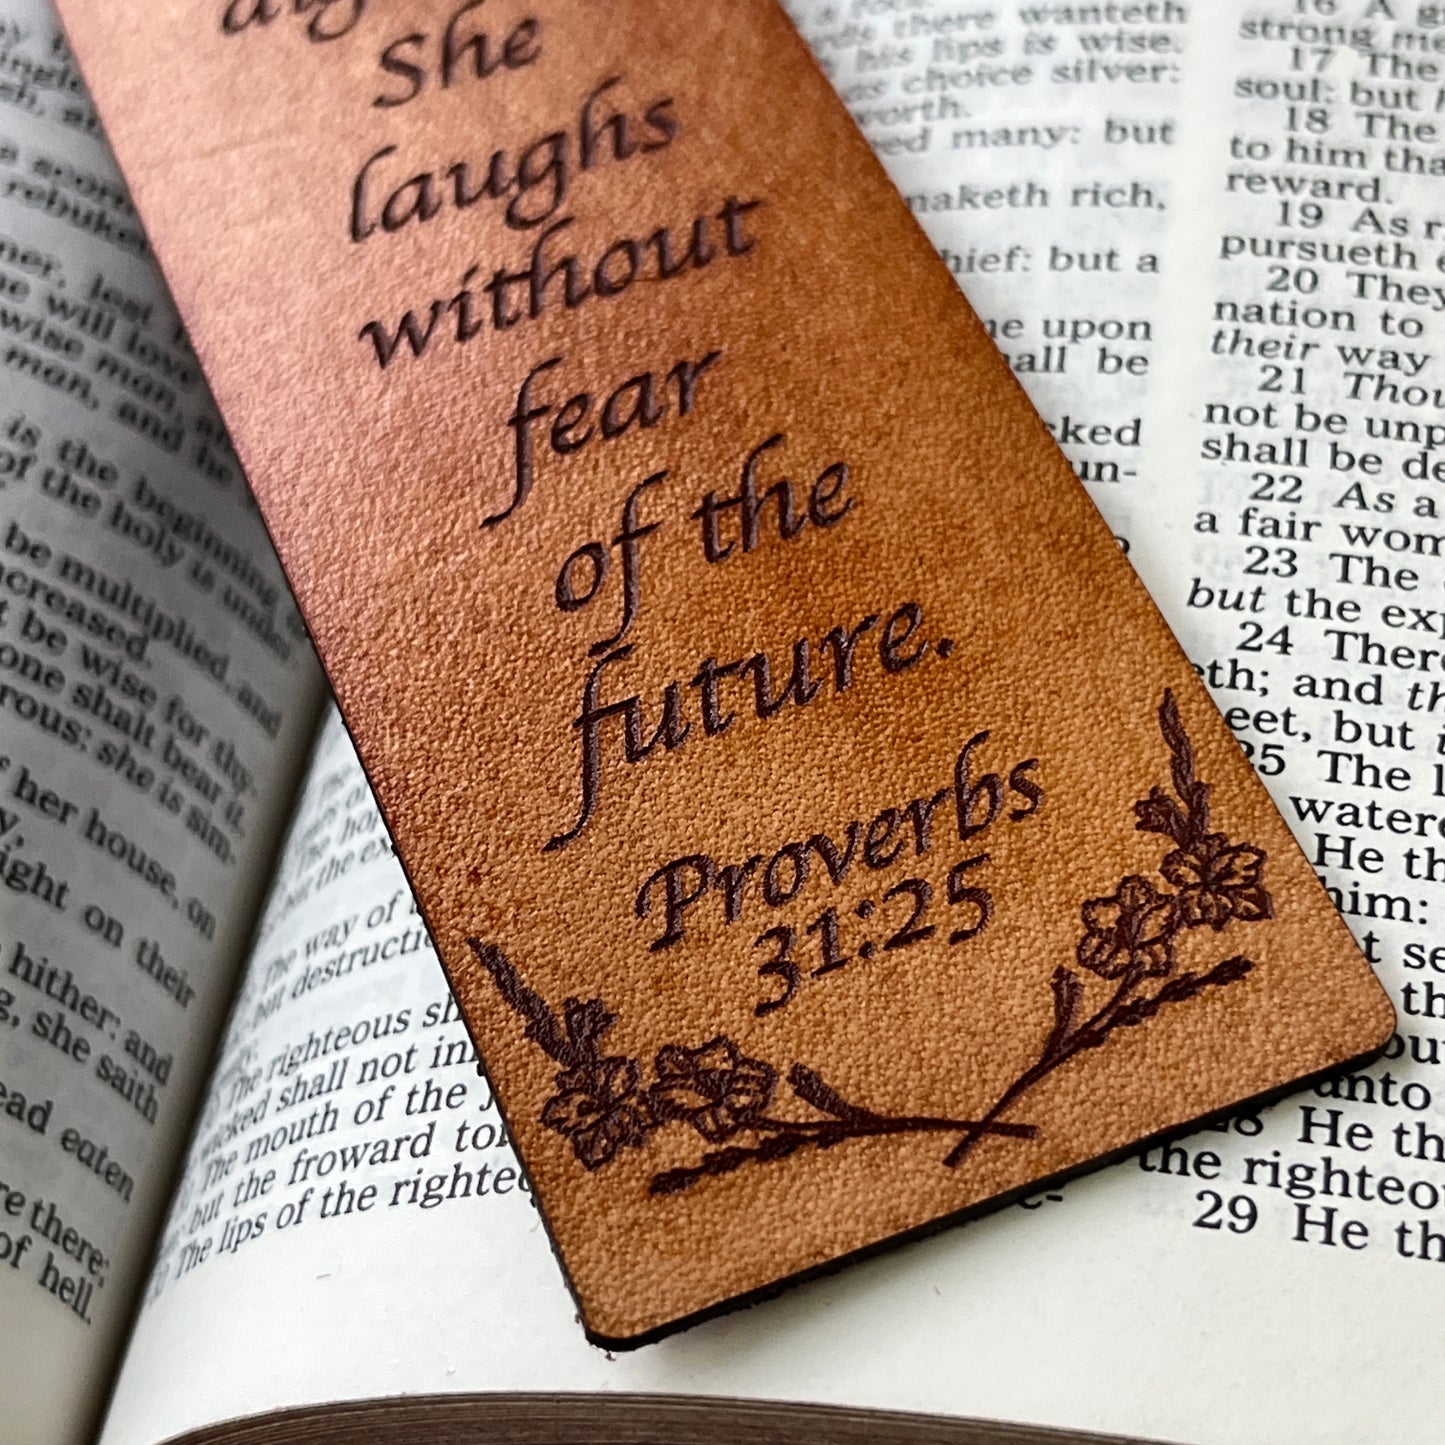 She is Clothed in Strength and Dignity Genuine Leather Bookmark